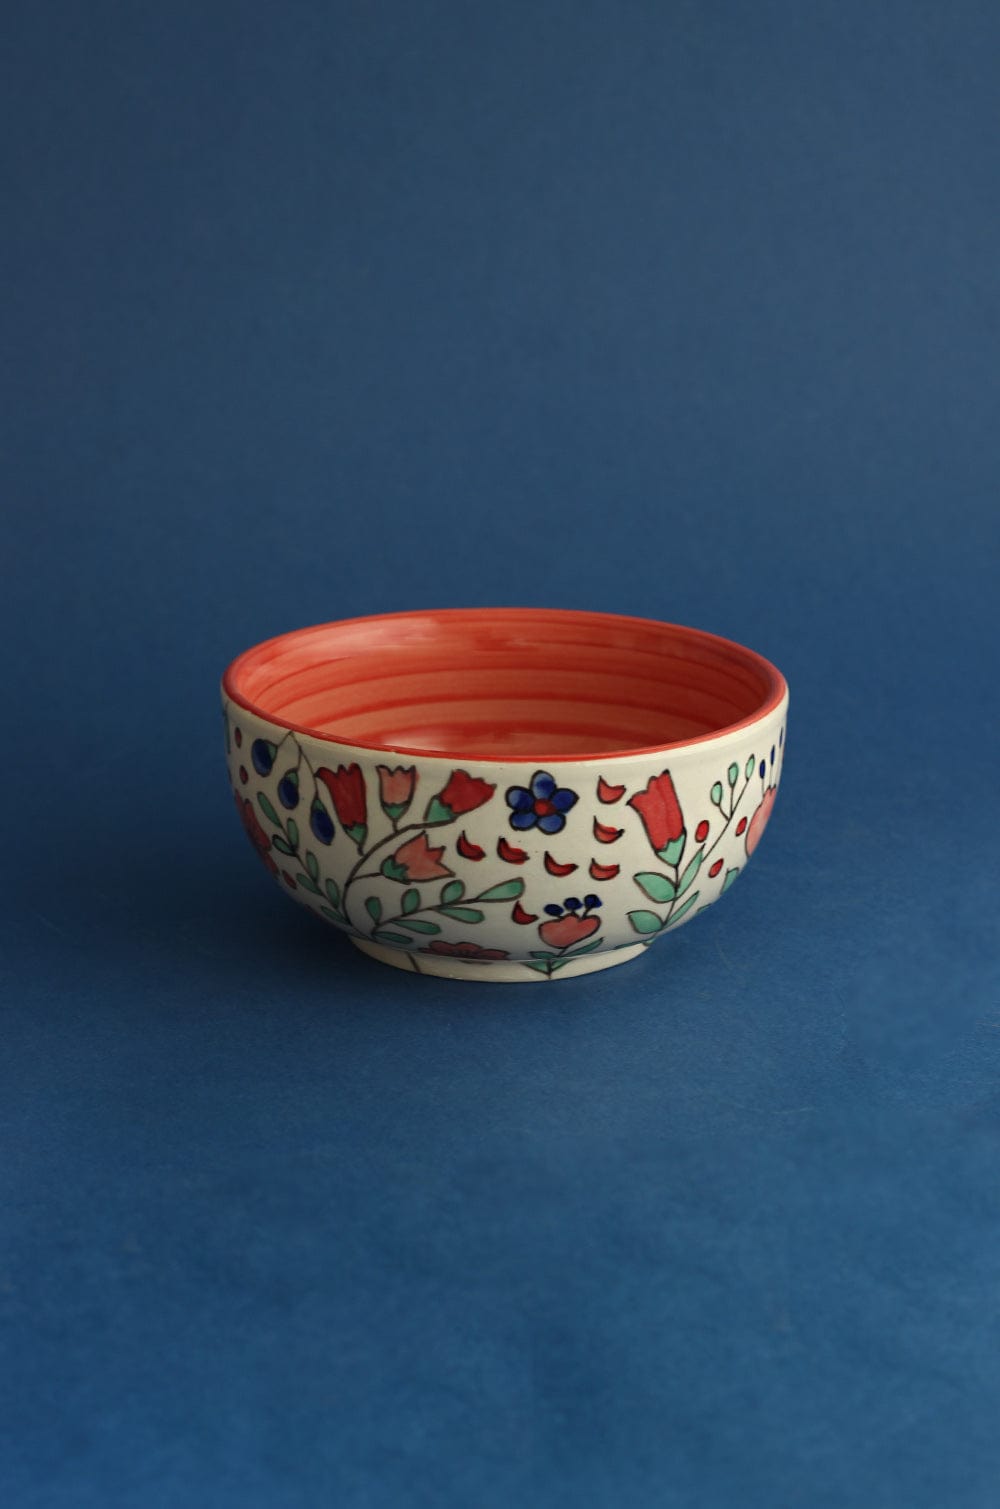 Flower Meadow BowlMaterial: Handpainted Handmade Stoneware
Dimensions: Large - 9.50 Dia x 5 H Inch, Small - 6 Dia x 3.50 H Inch

Handle with care. May Chip or Break on Impact. MicrowaFlower Meadow BowlThe Wishing Chair